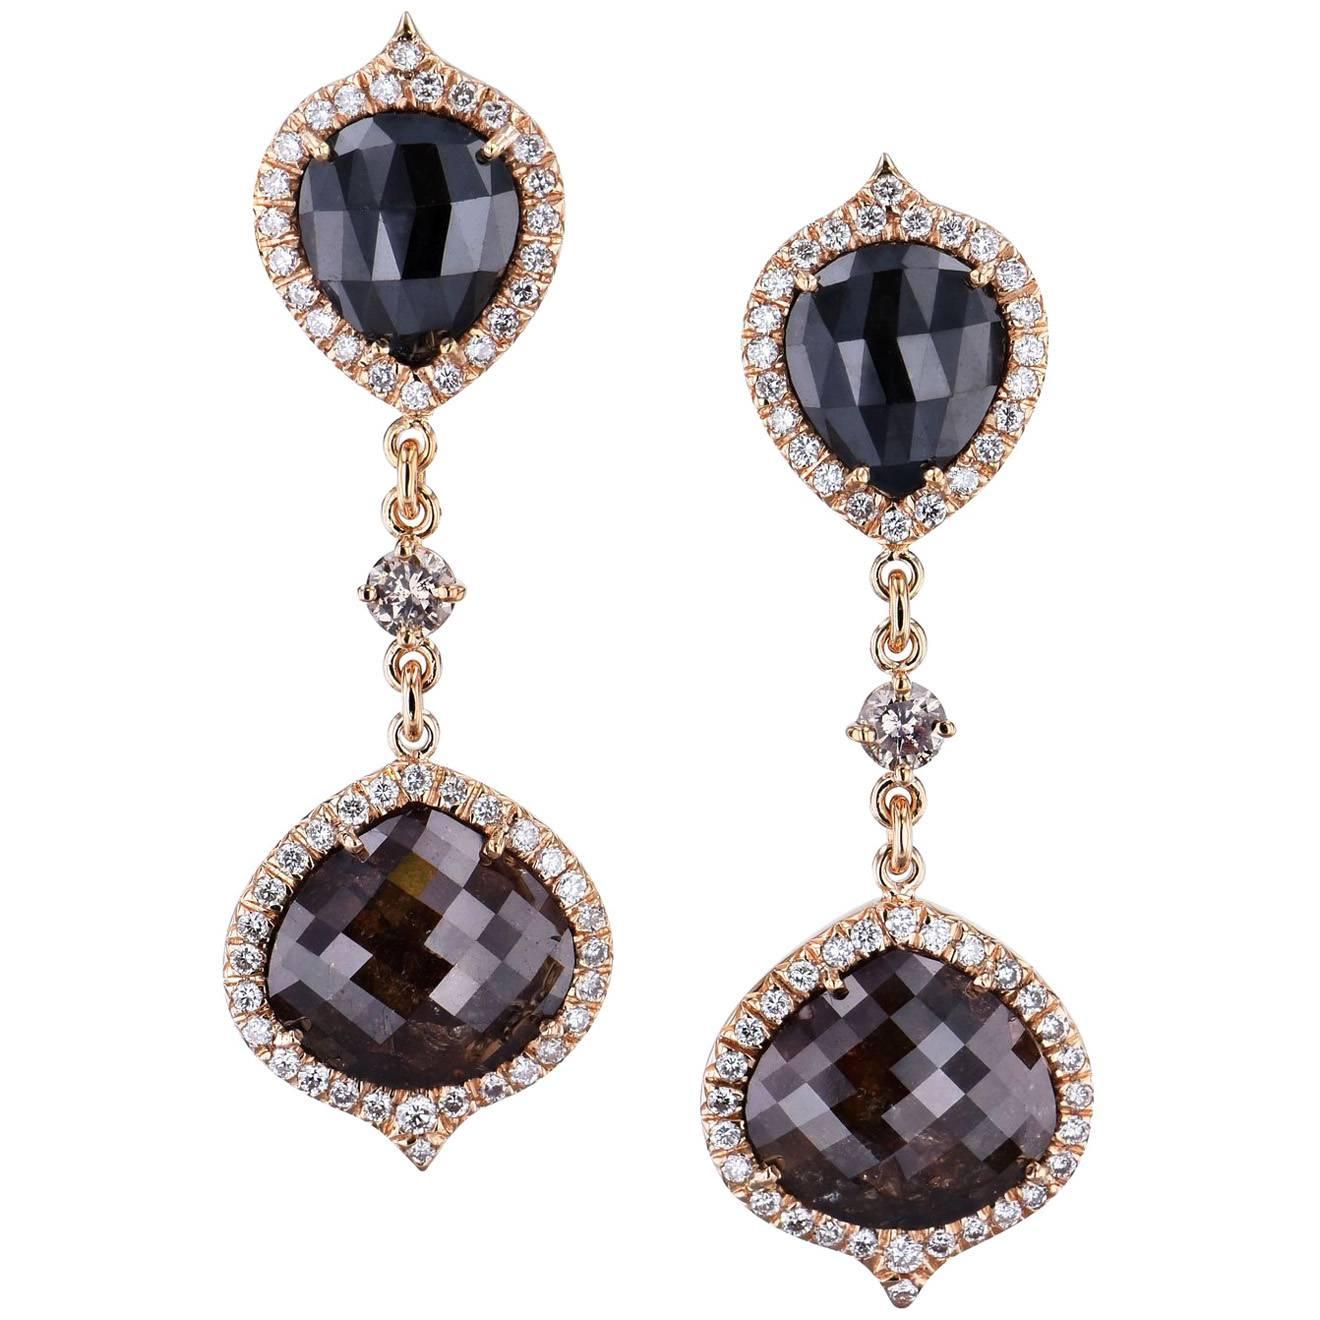 13.56 carat Black and Brown Diamonds with .91 carat Pave White Diamonds Earrings